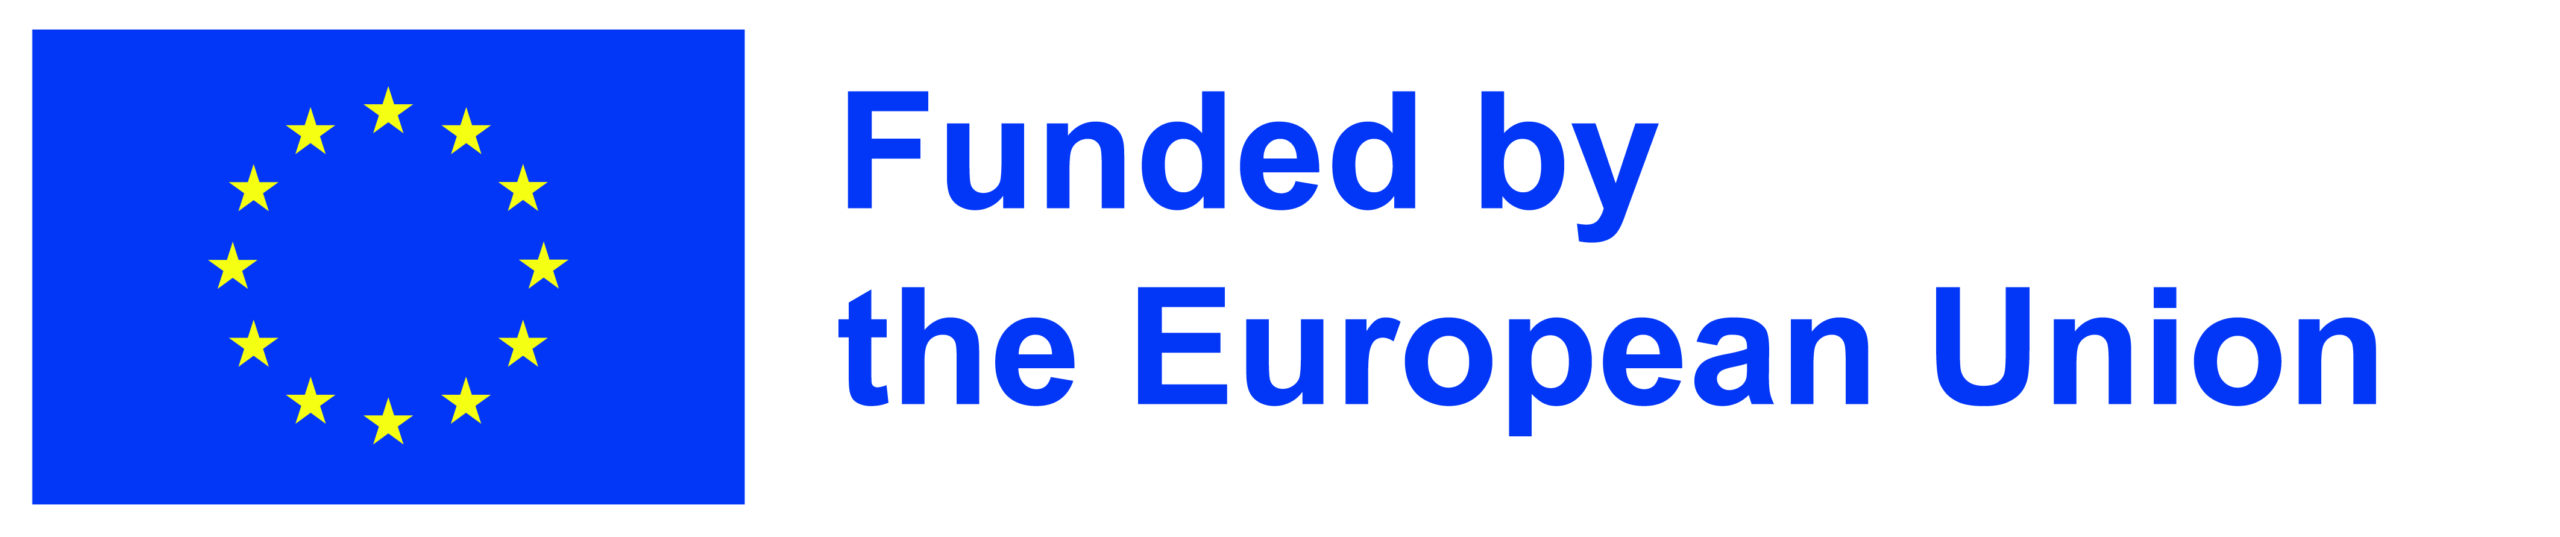 This project has received funding from the European Union’s Horizon Europe research and innovation funding programme under Grant Agreement No 101091668. Grant amount: 14 292 022,25 euros. Grant for ITENE: 492 812,50 euros.